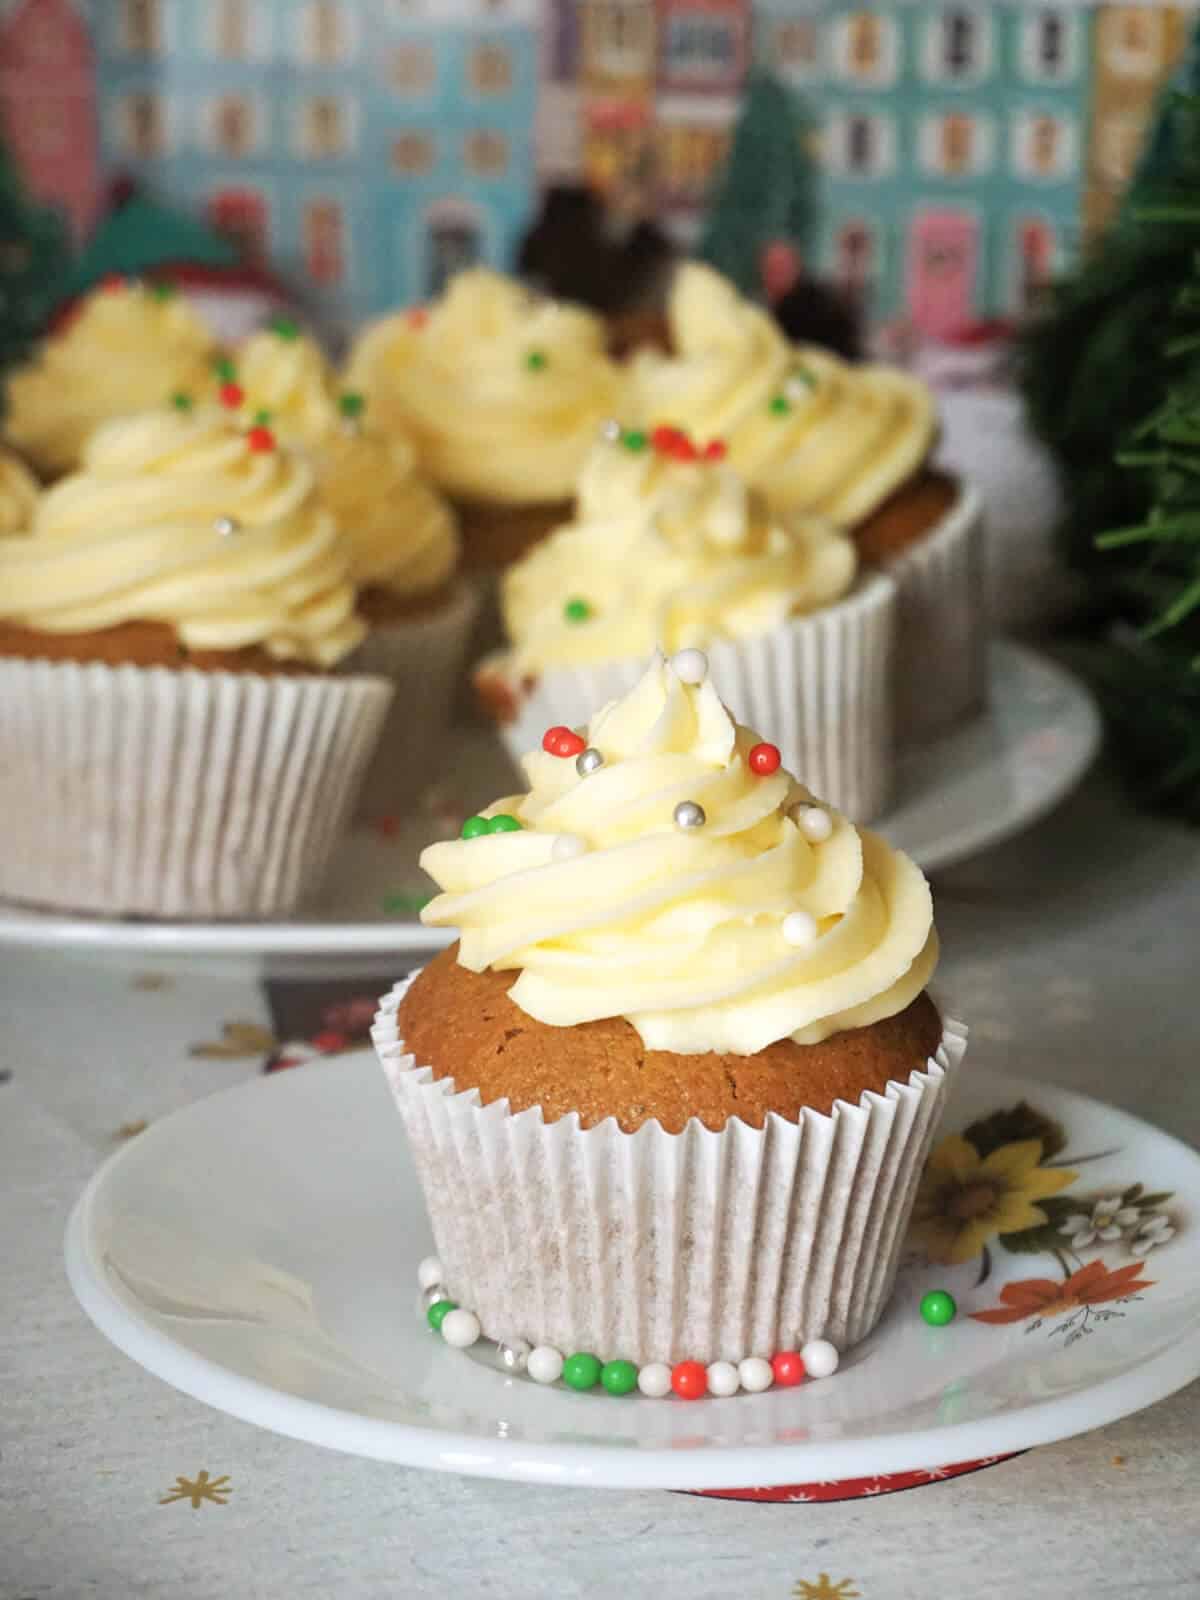 A gingerbread cupcake on a white plate with more cupcakes in the background.